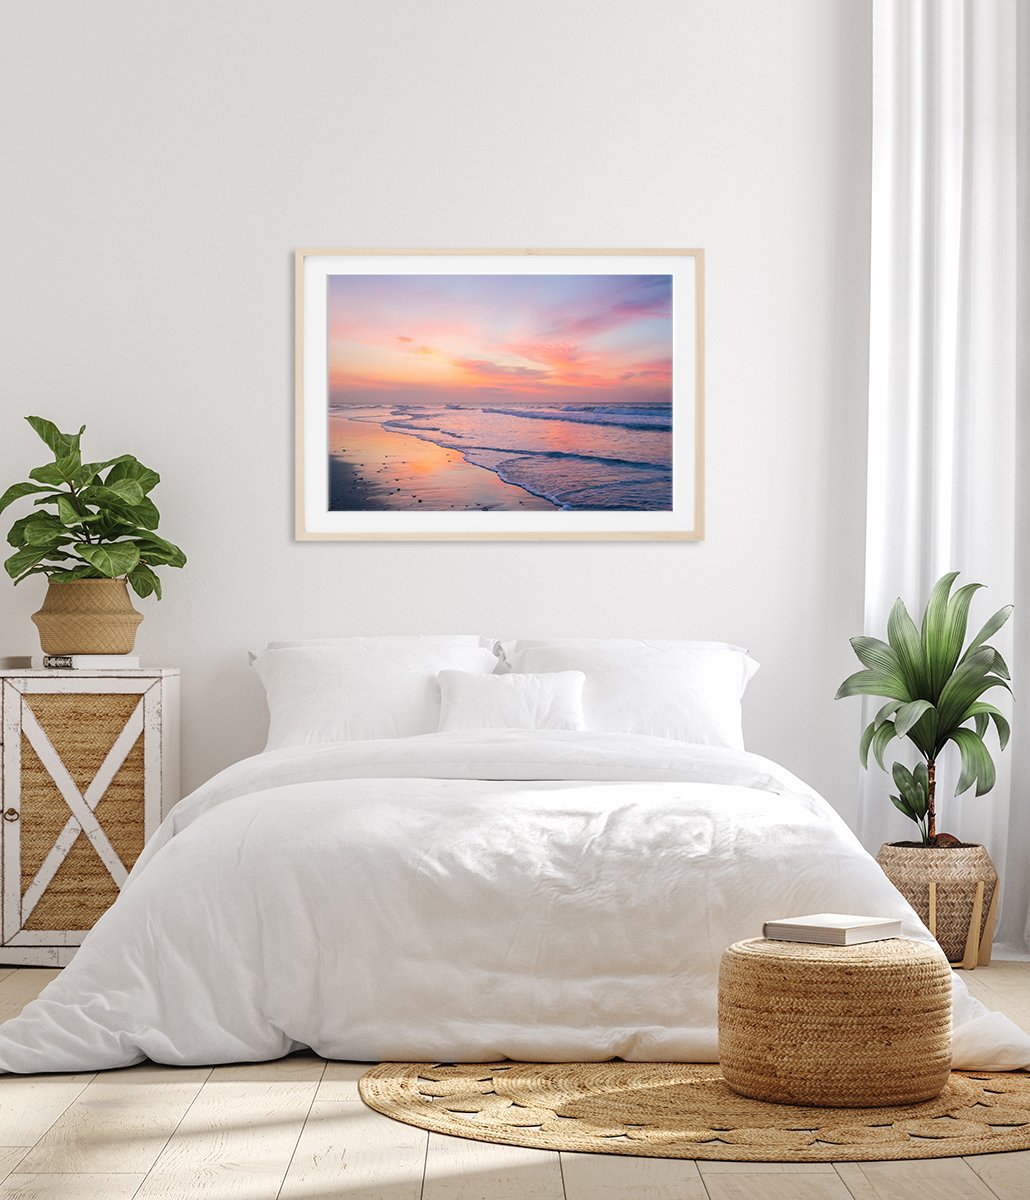 bright white bedroom decor featuring pink colorful sunrise beach photograph by Wright and Roam